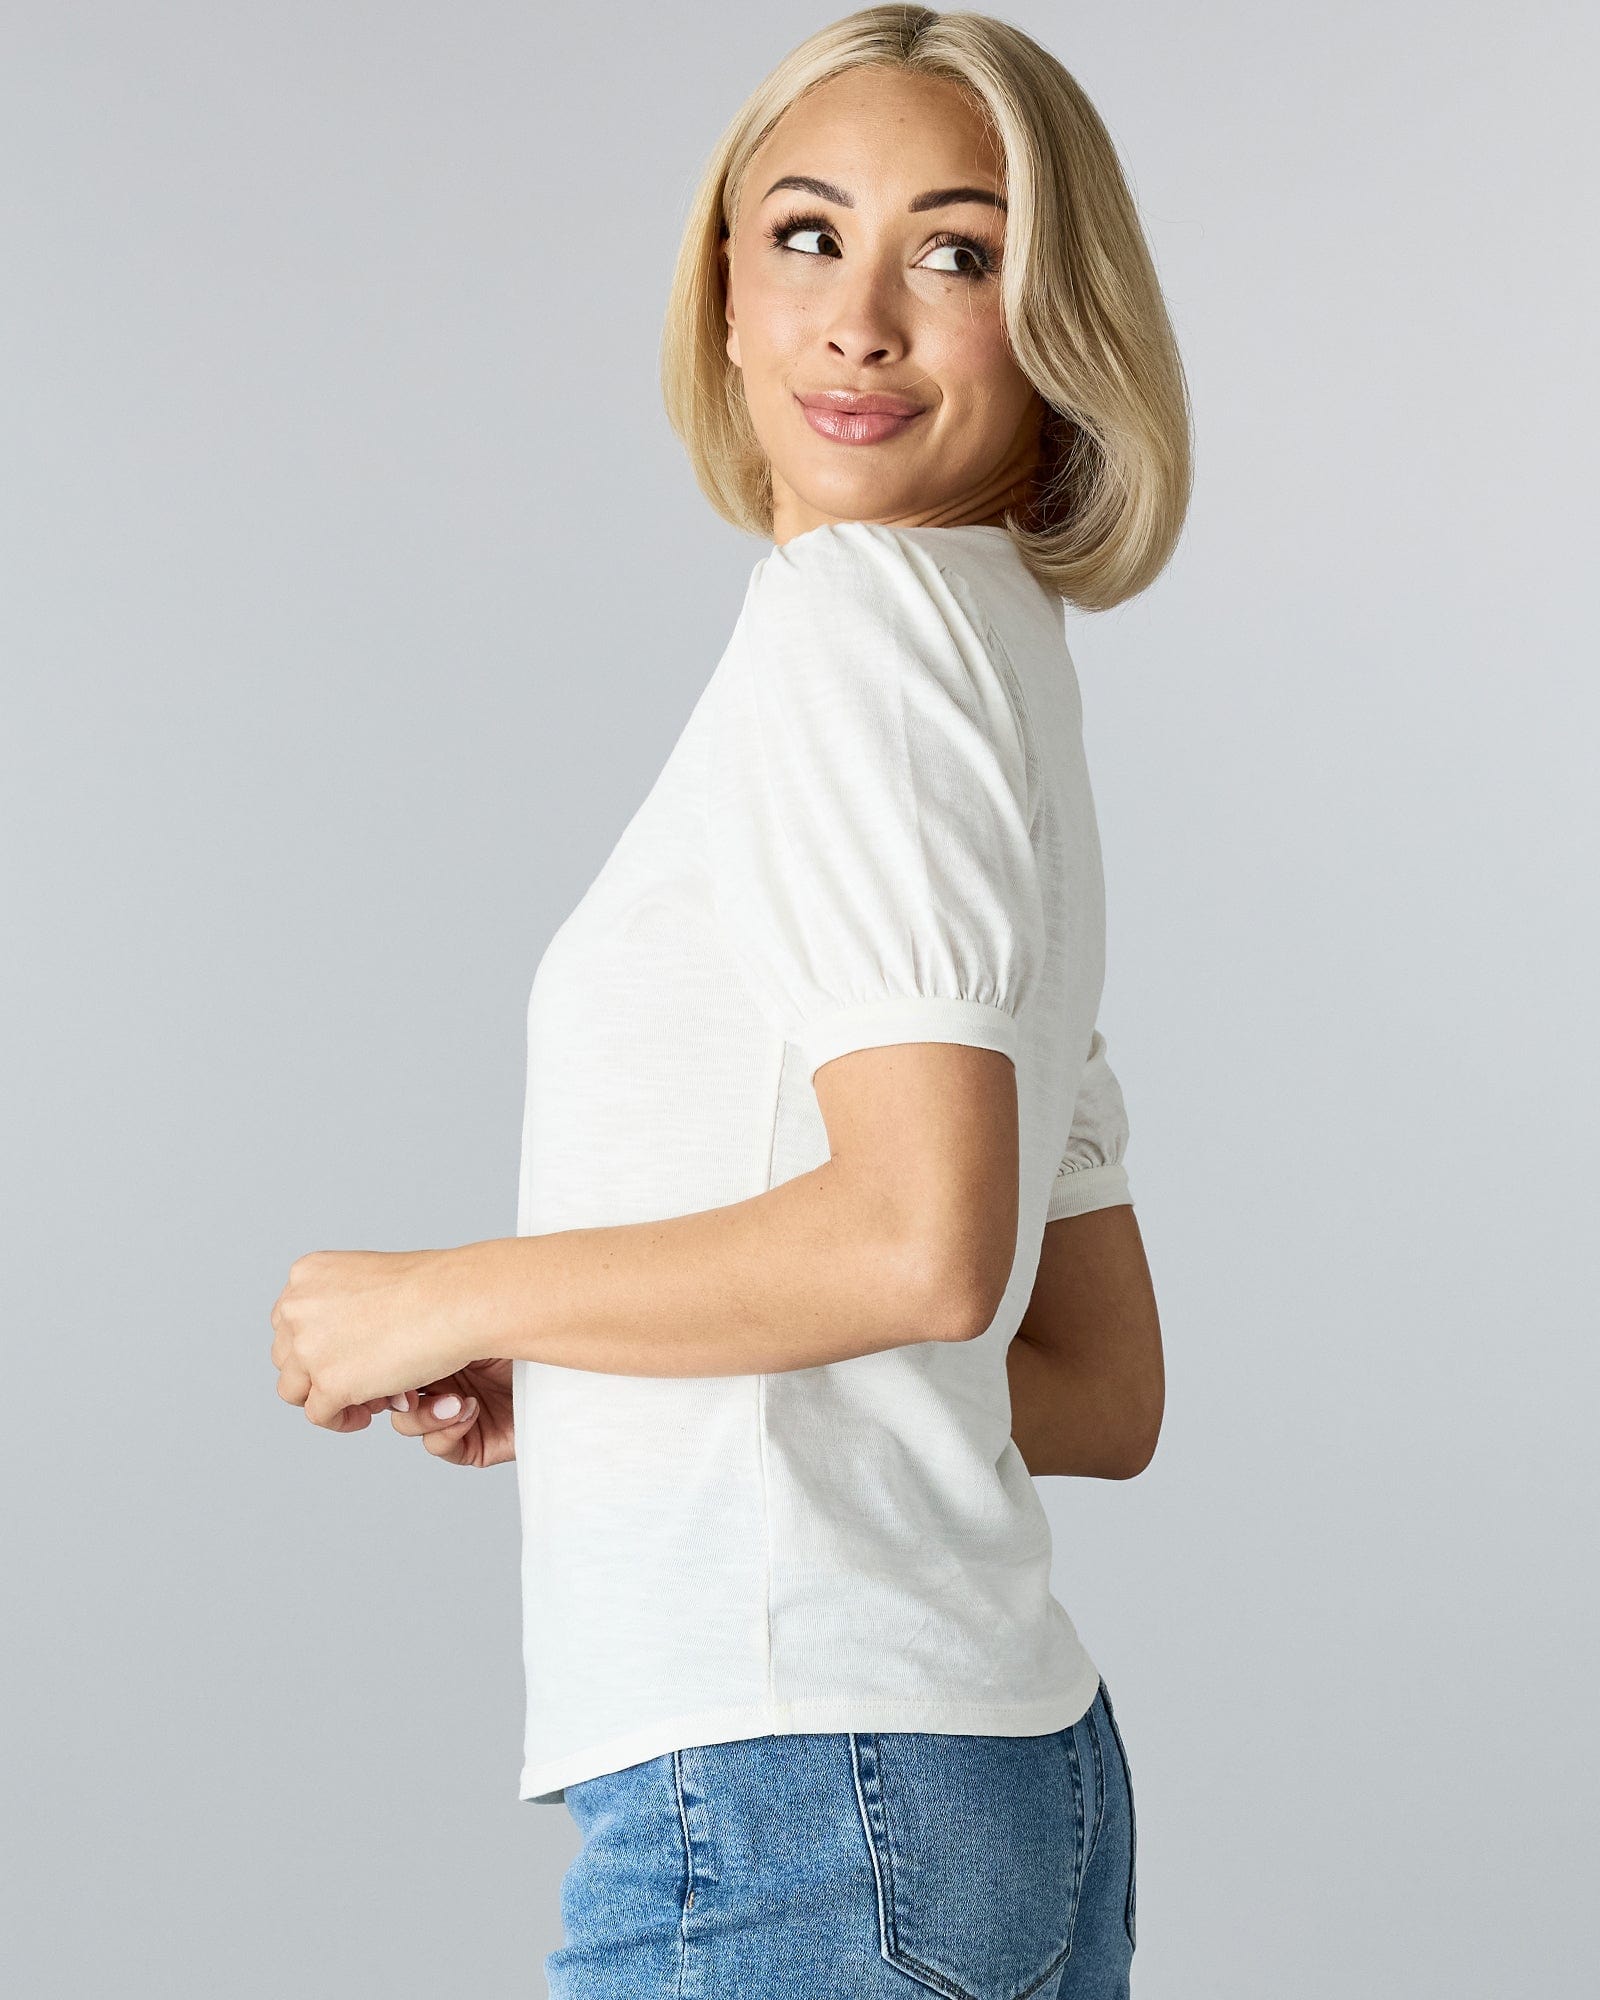 Woman in a short sleeved t-shirt.